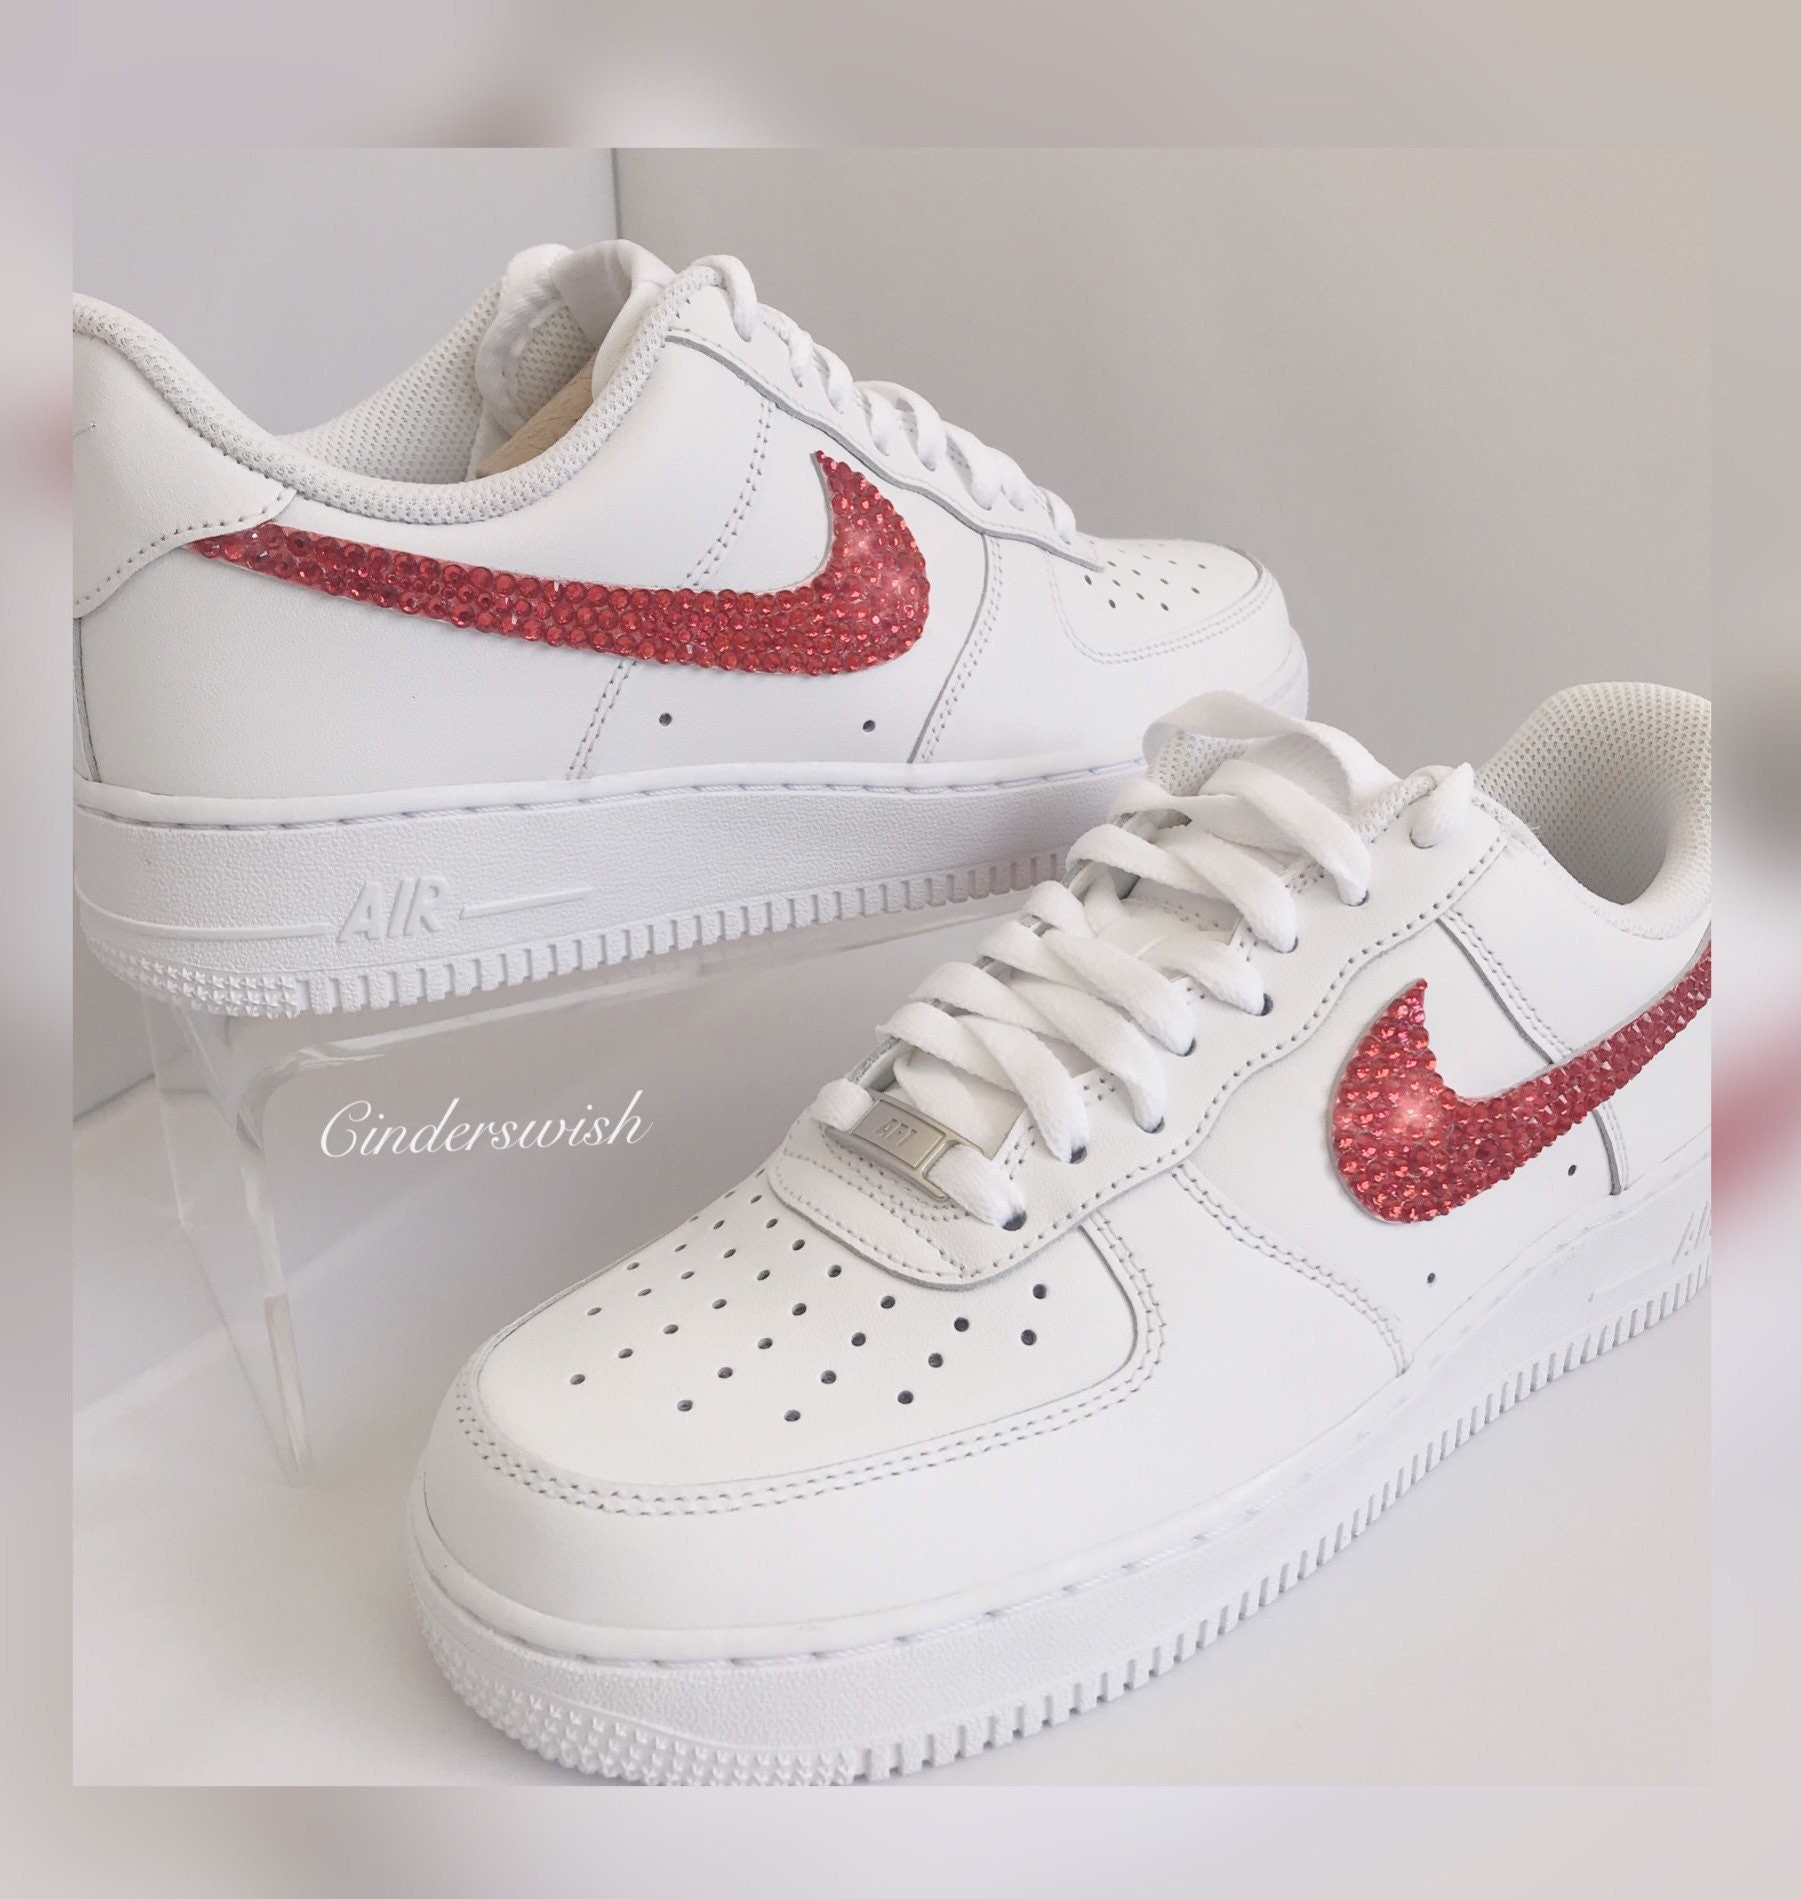 Adult Size Swarovski Nike Air Force Ones With Any Colour Tick - Etsy